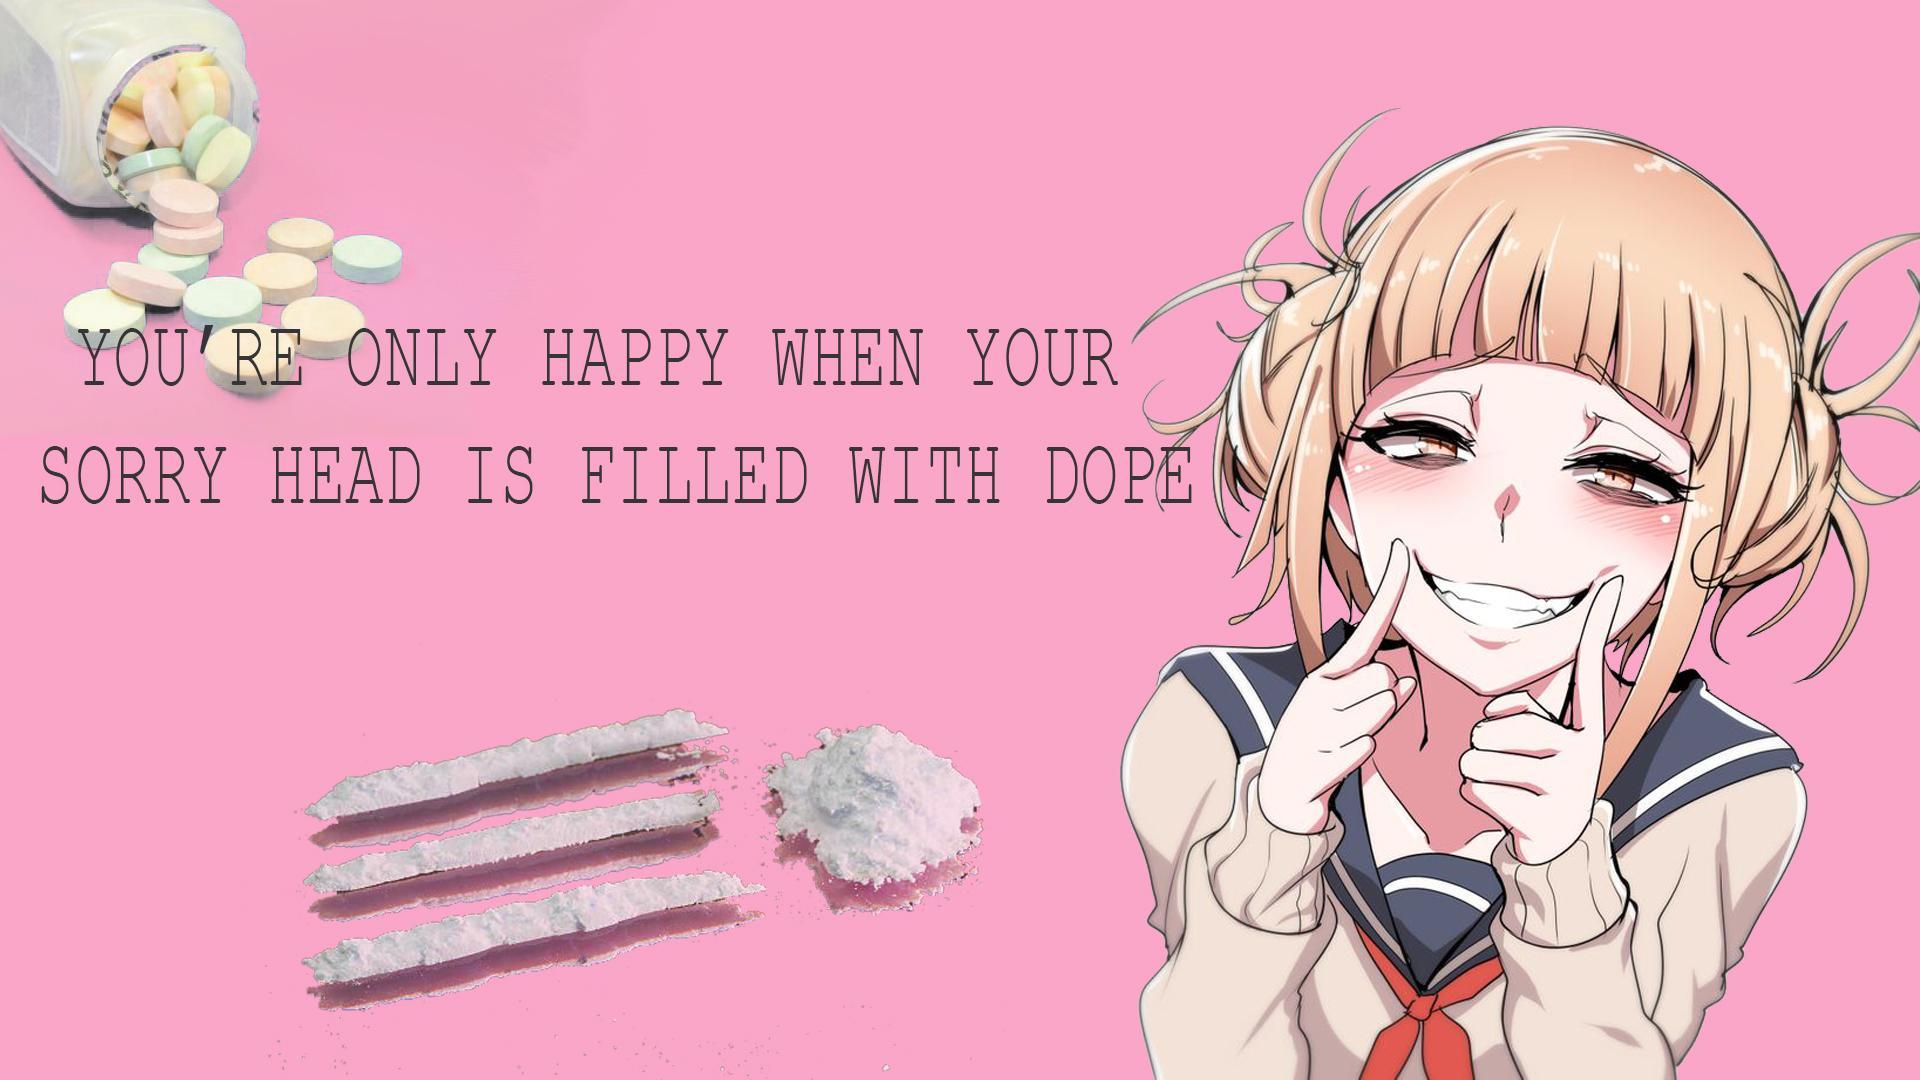 Himiko Toga I was bored and made this, and i thought i'd share it